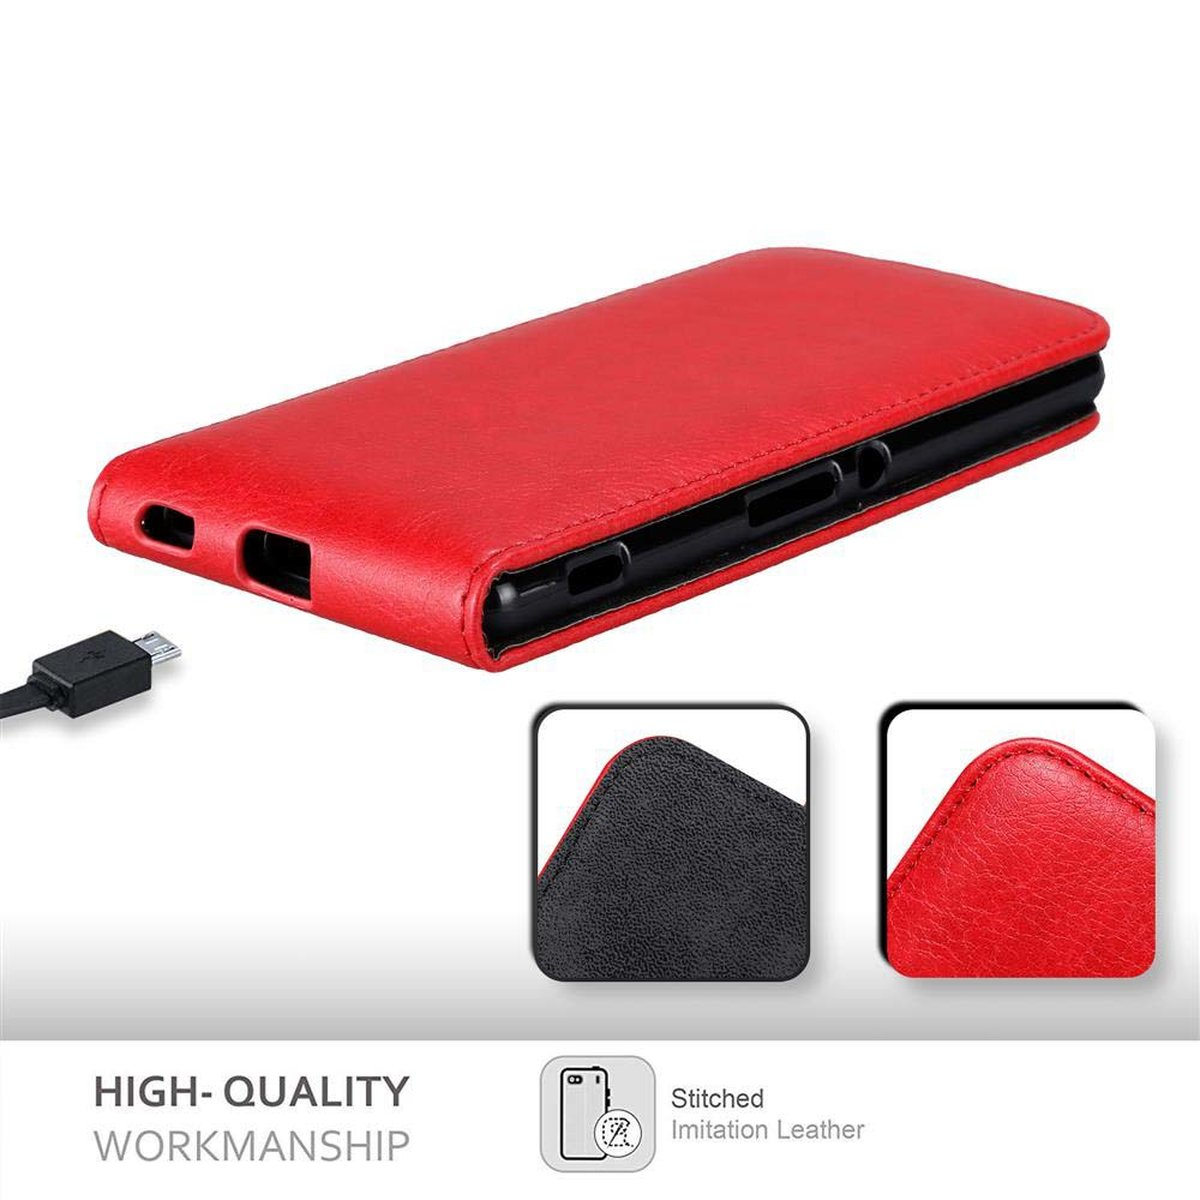 M5, Xperia Hülle ROT im Flip Cover, Style, Sony, APFEL Flip CADORABO